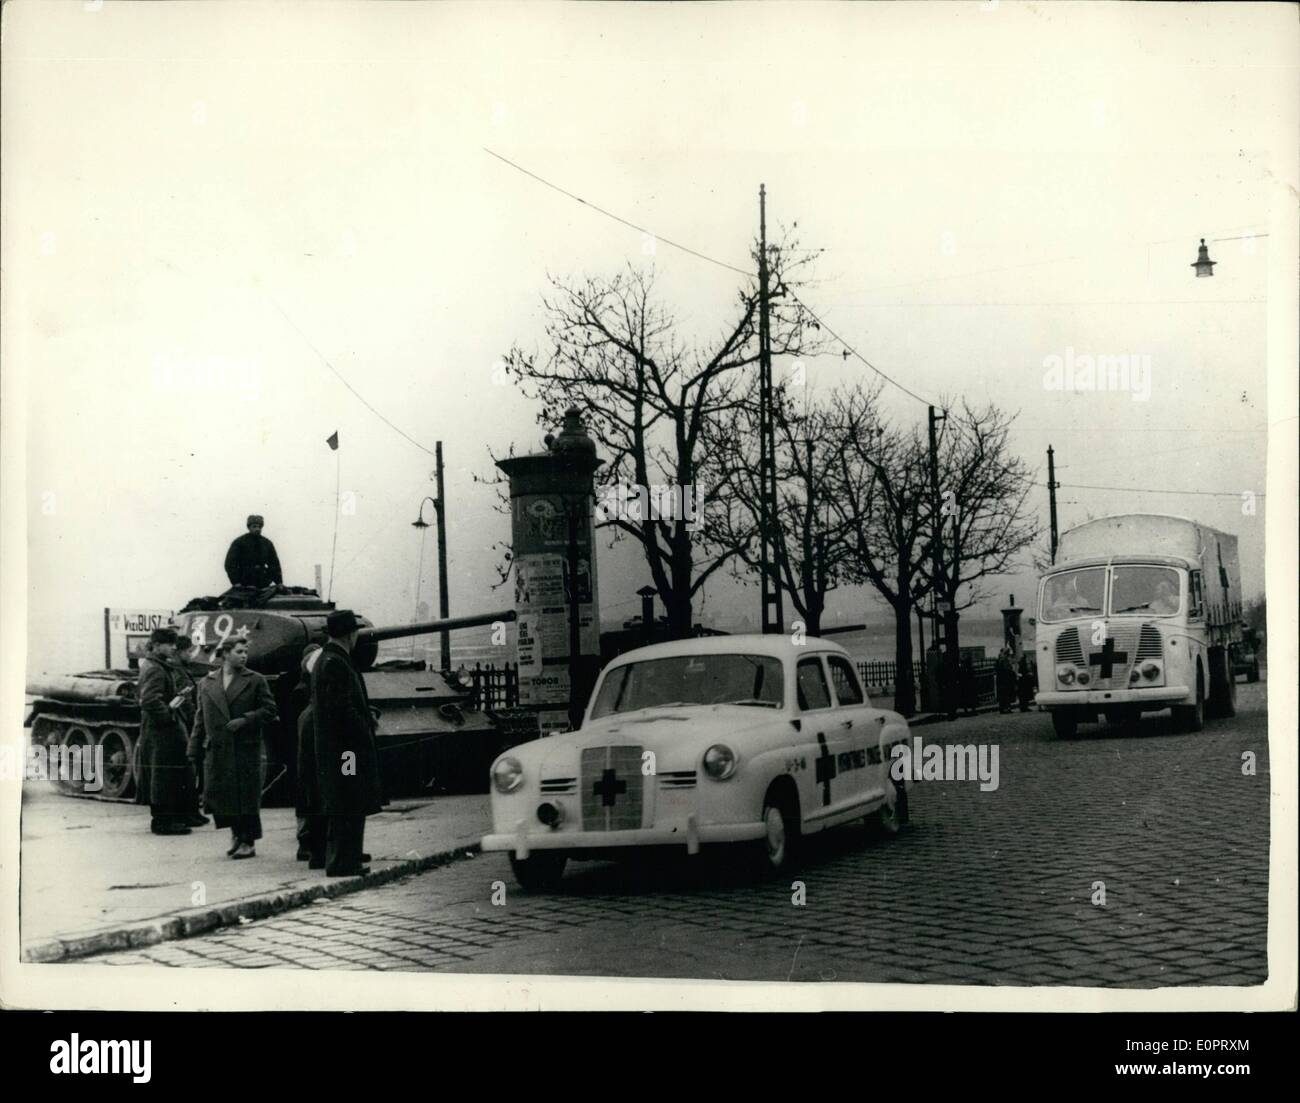 Nov. 11, 1956 - New scene from Budapest Red Cross Ambulance from the West pass Soviet Tank; Photo Shows New picture just received from Budapest - shows Red Cross Ambulance from the West on a mercy mission arriving in the City of Budapest - passing a Soviet Tank used by the Russians to crush the resistance of the Hungarian nationals. Stock Photo